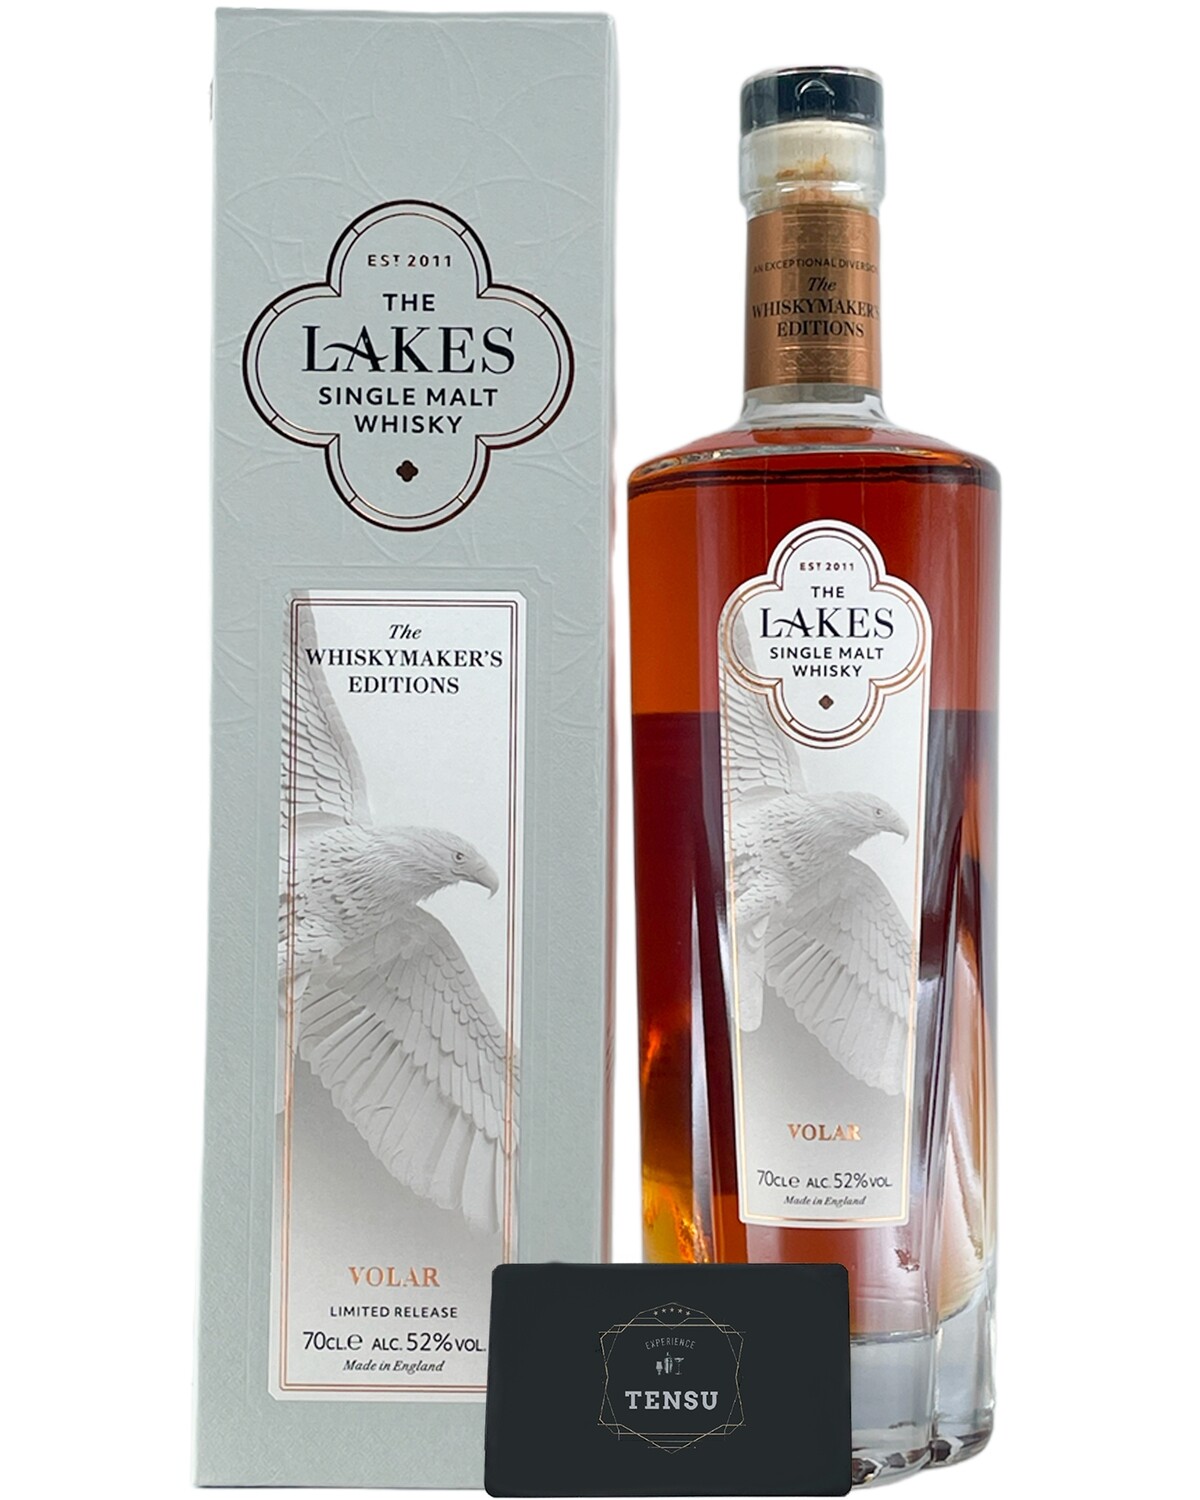 The Lakes - The Whiskymaker's Editions - Volar 52.0 "The Lakes Distillery"